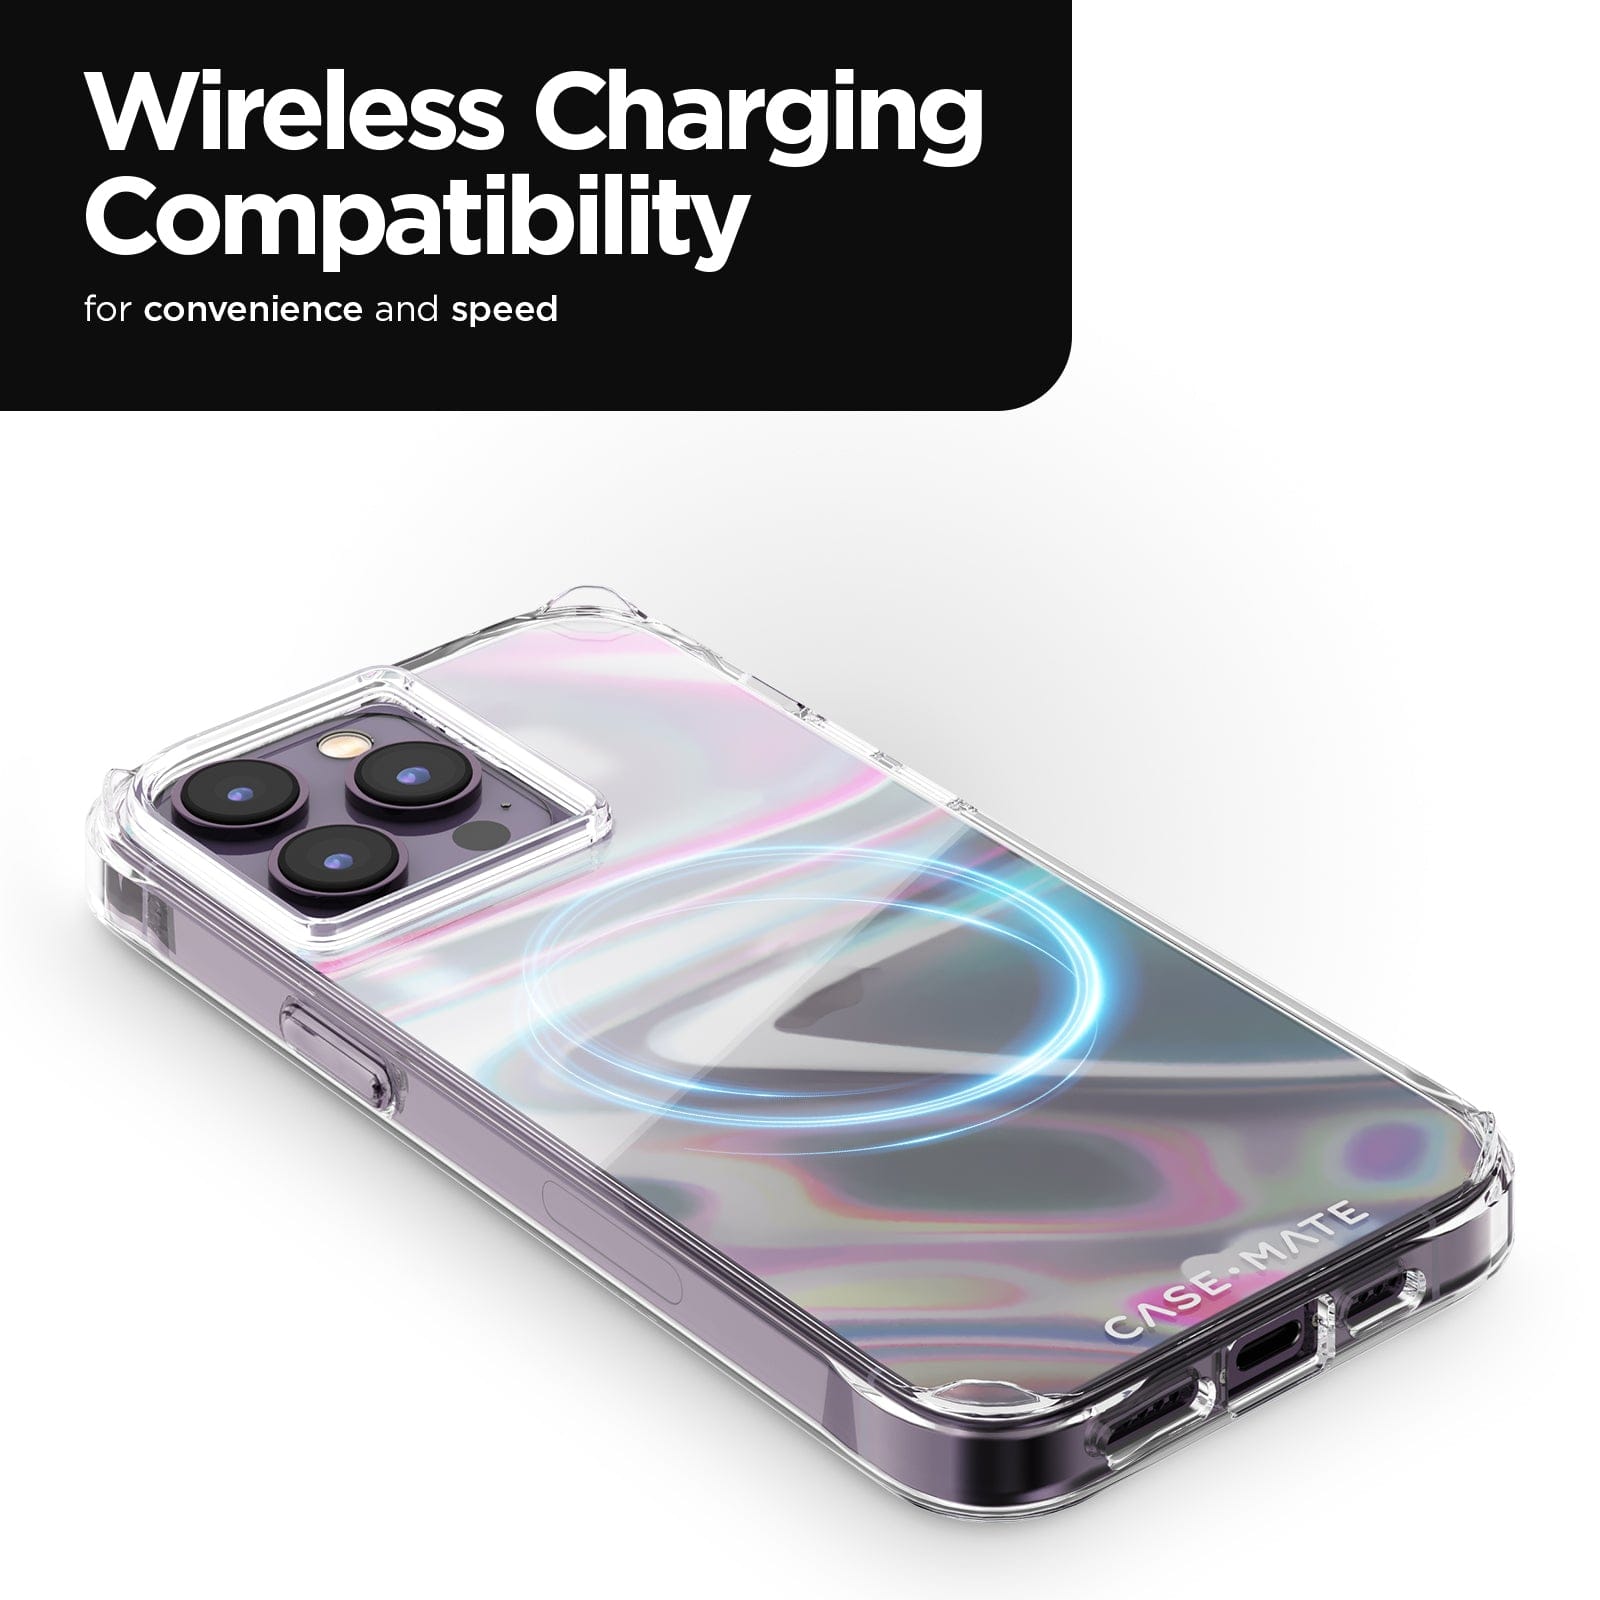 WIRELESS CHARGING COMPATIBILITY FOR CONVENIENCE AND SPEED